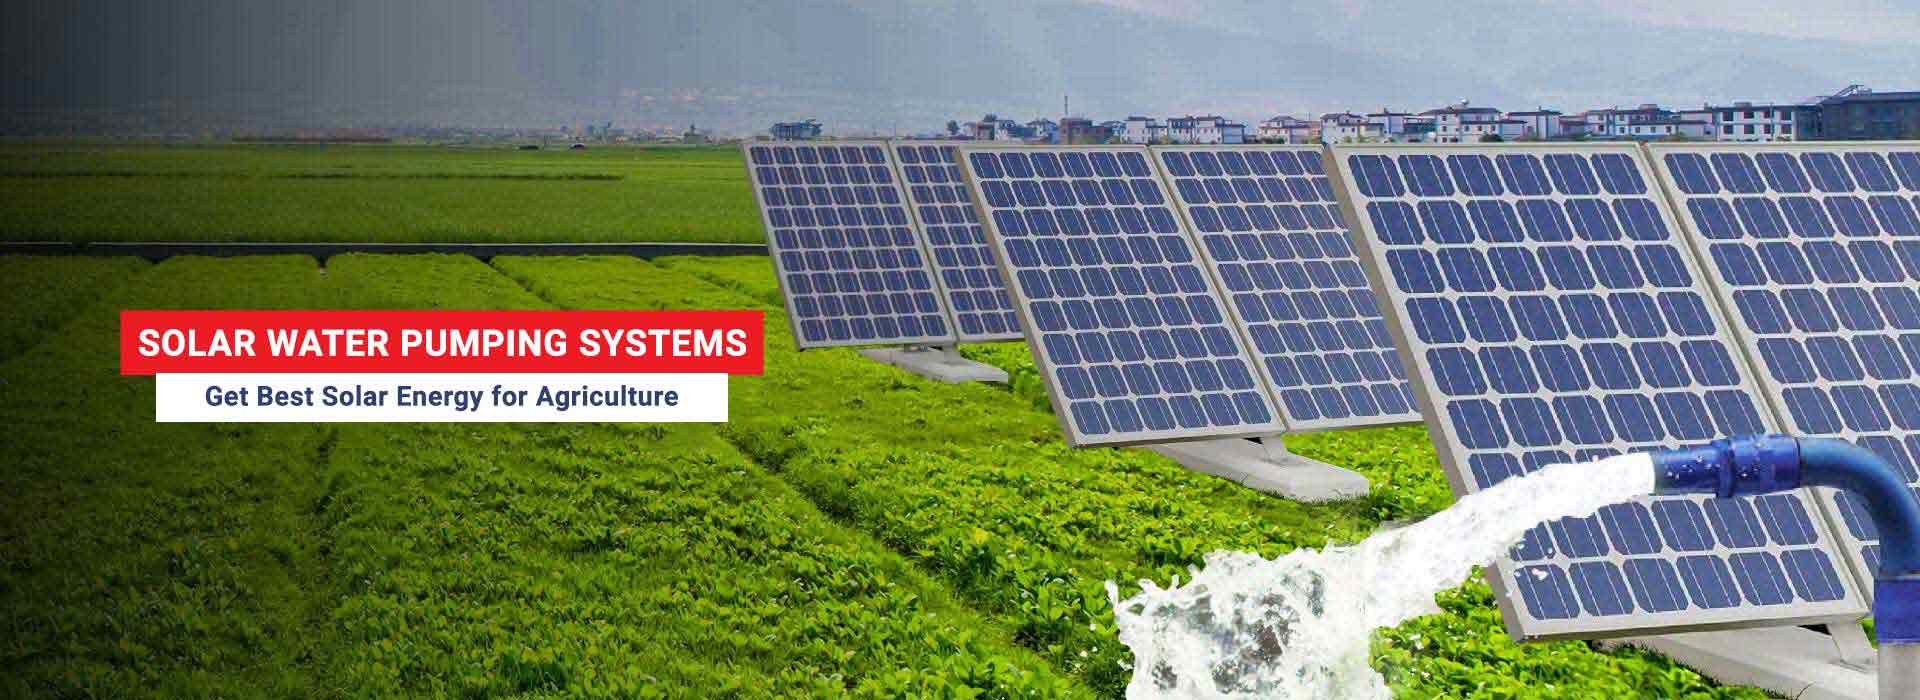 Solar Water Pumping Systems in Oman